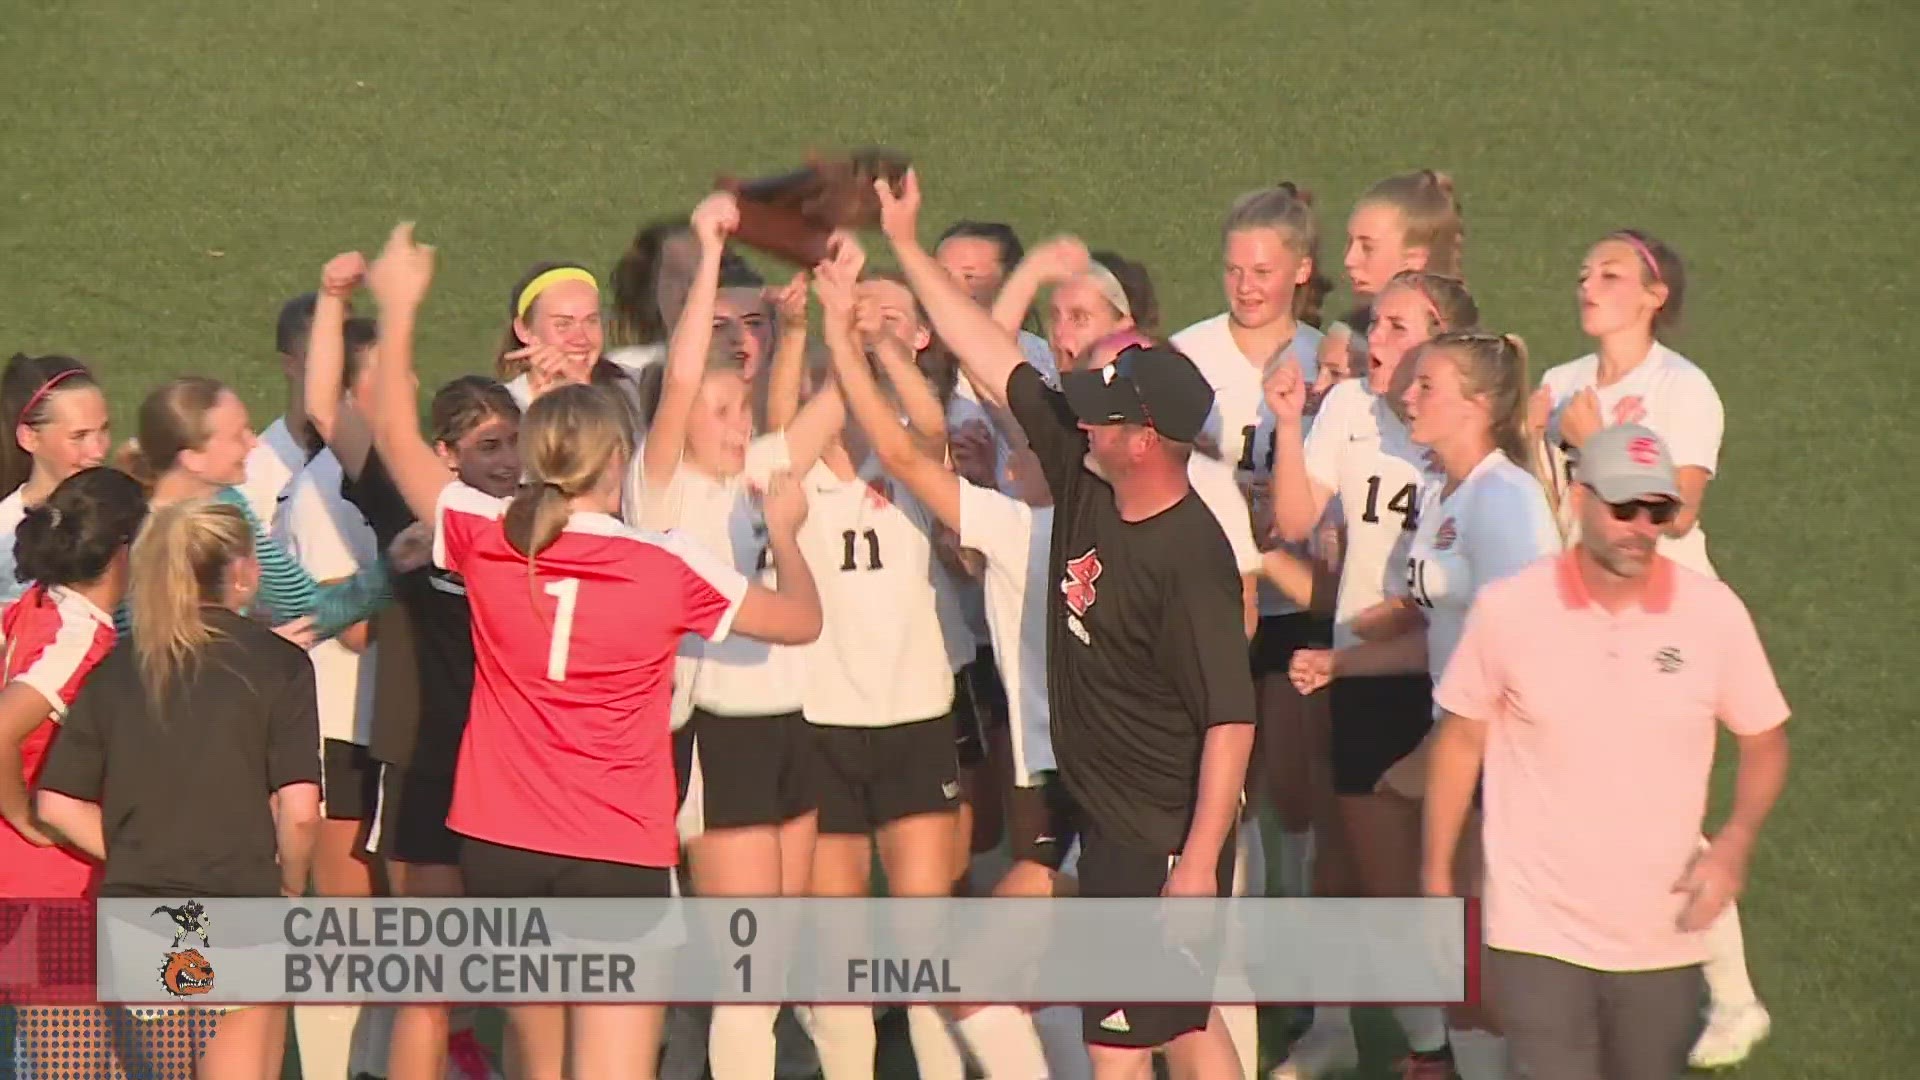 Byron Center wins the district title 1-0 over Caledonia.